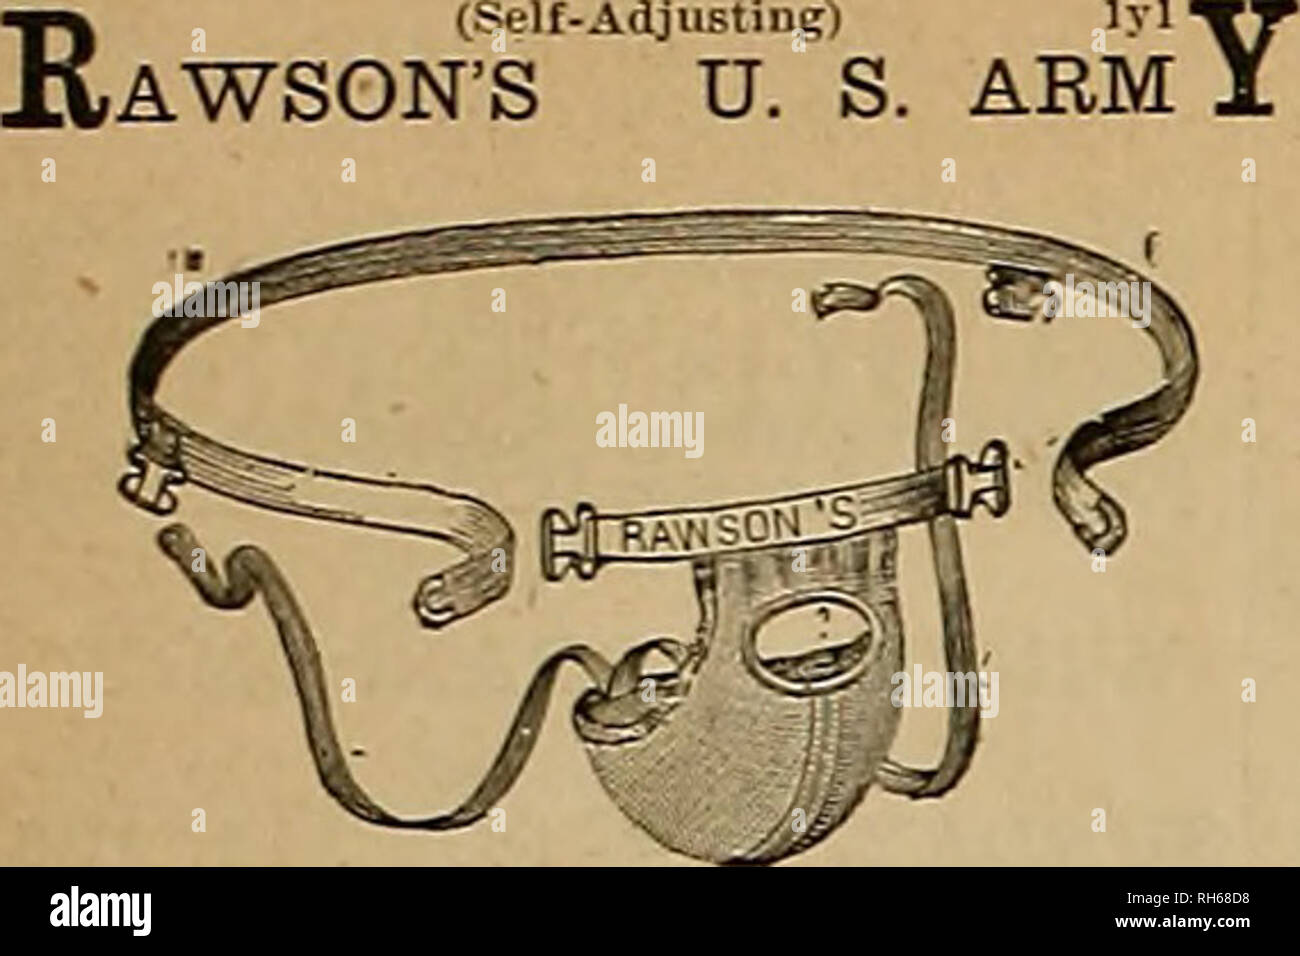 . Breeder and sportsman. Horses. 160 Jfec larmier nml ^oxtsnmm Mar 8. Suspensory Bandages. A perfect fit guaranteed. Support, Relief, Comfort. Automatically Adjustable. DISPLACEMENT IMPOSSIBLE. Treatise on Nervous Tension and Circular mailed free. Sold by Druggists. S. E. «. RAWSON, Sent by mail safely. Patentee, Saratoga Springs. N.Y. Largest and Finest Stock - - ASHLAND PARK   [ ROTTING STU|; NEAR LEXINGTON, KY. B. J. TBEACY, PROPRIETOR. THIS IS STRICTLY A BREEDING FARM. FOR though training is done, it is only for the stock be. longing to the place, or those pure based from the pro- prietor. Stock Photo